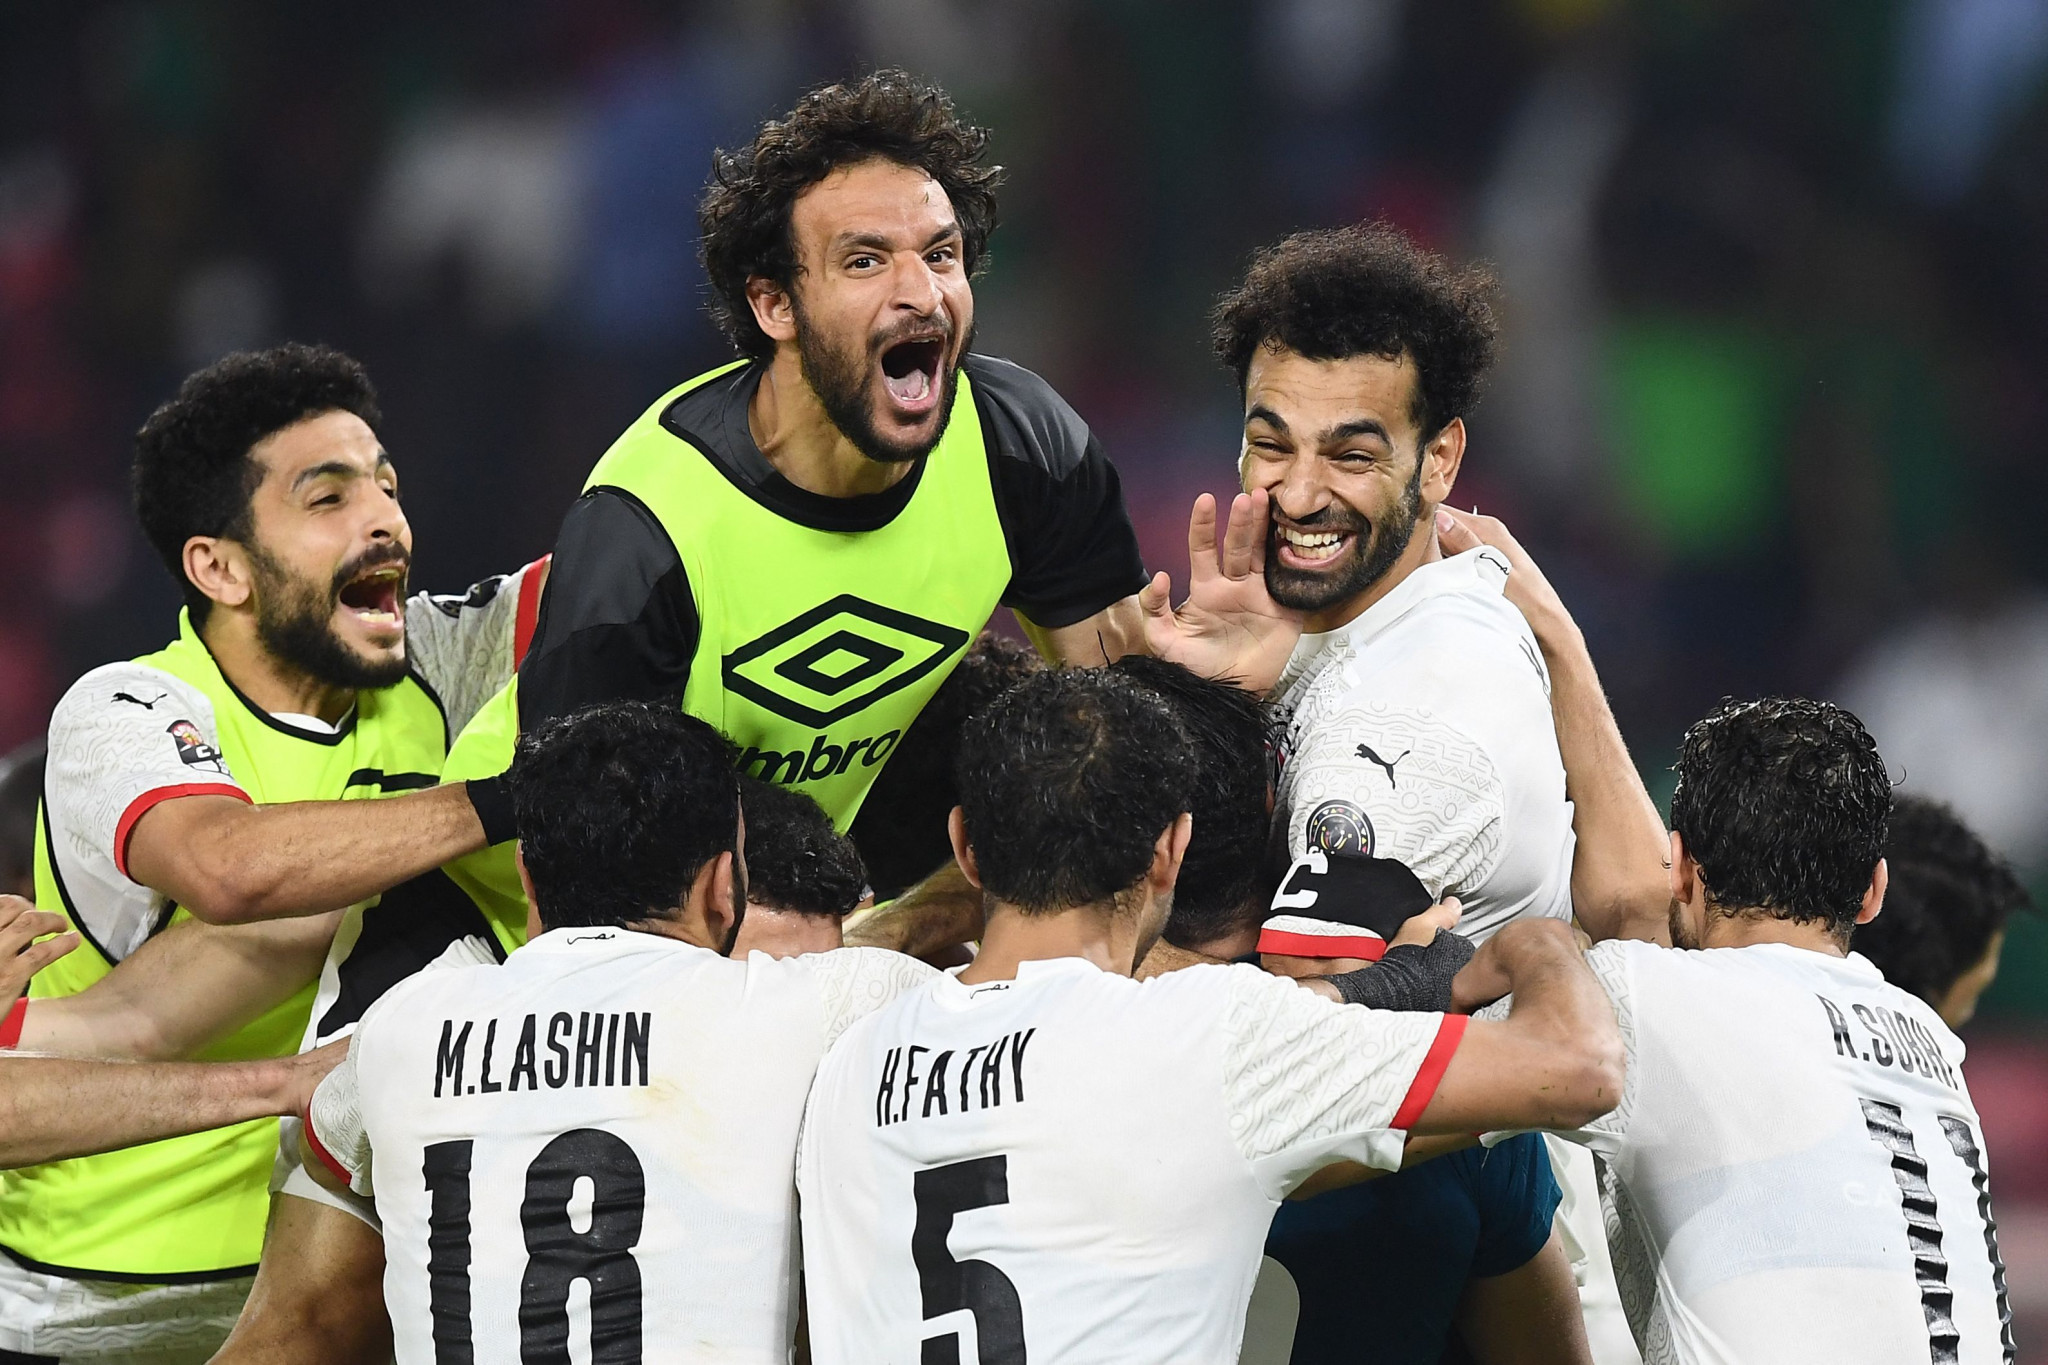 Egypt beat Cameroon on penalties to reach the Africa Cup of Nations final ©Getty Images